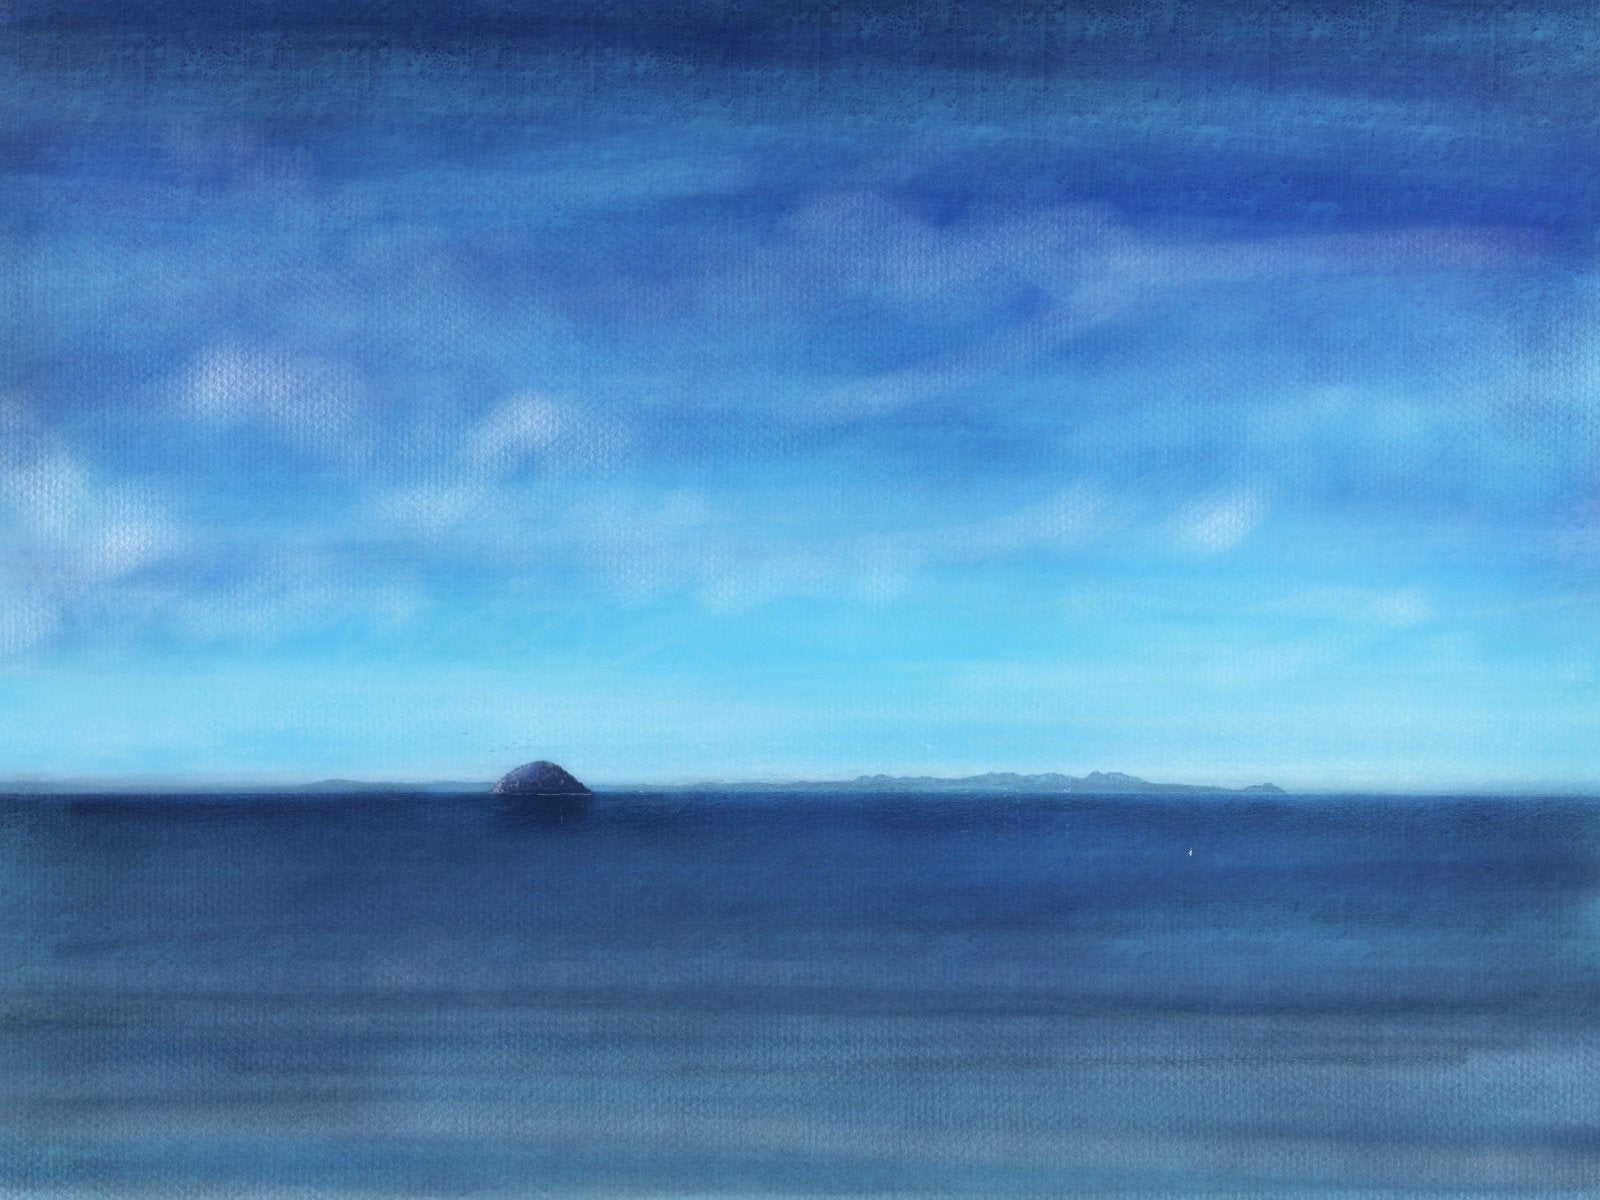 Arran And Ailsa Craig-Signed Art Prints By Scottish Artist Hunter-Arran Art Gallery-Paintings, Prints, Homeware, Art Gifts From Scotland By Scottish Artist Kevin Hunter